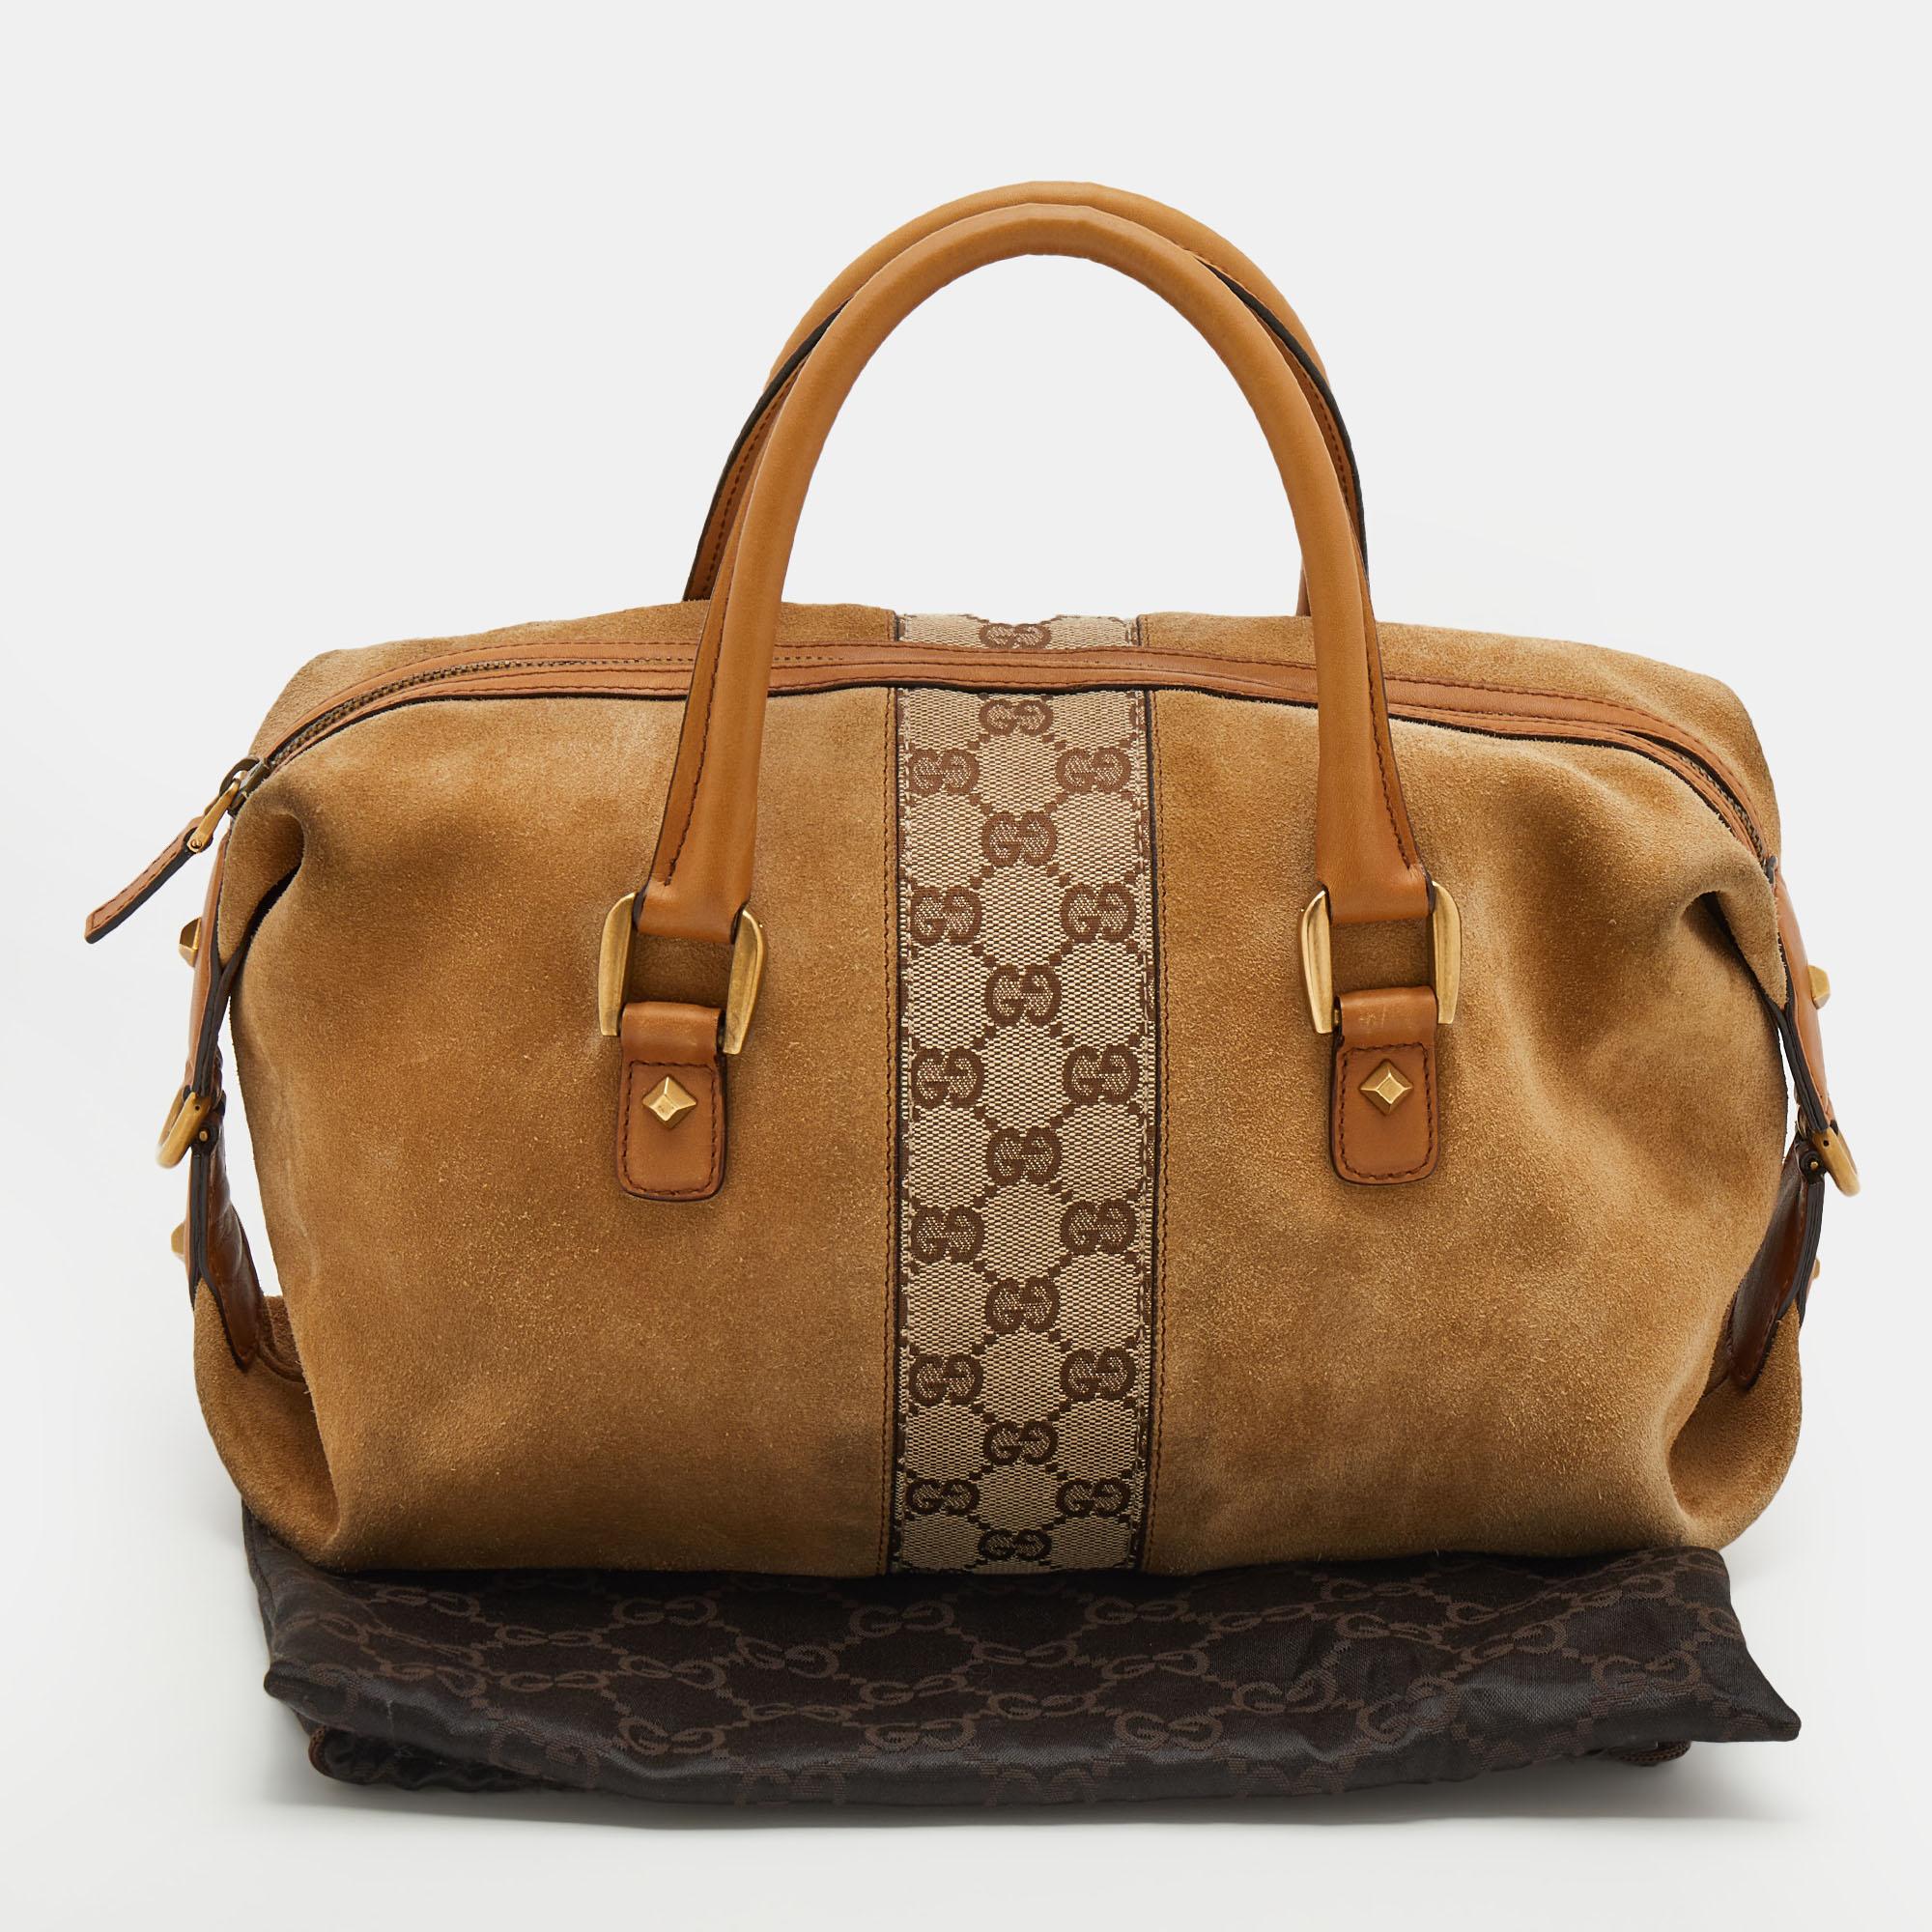 Gucci Beige/Tan GG Canvas And Suede Boston Bag 8